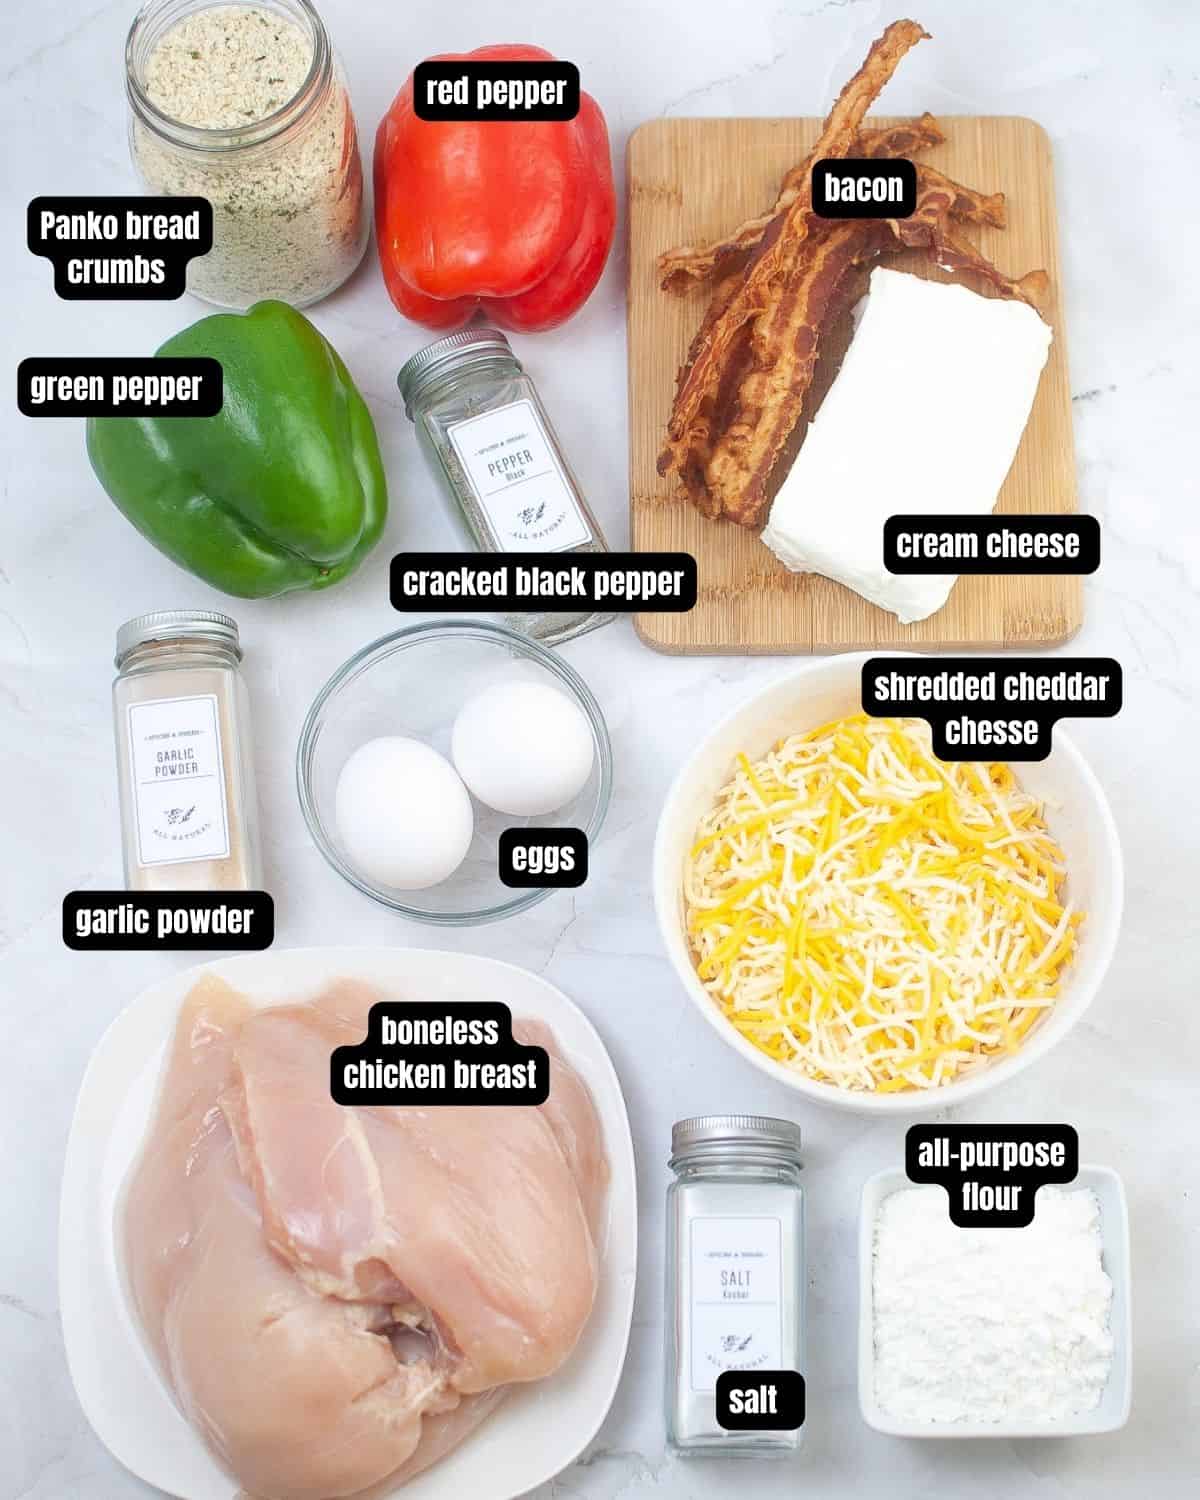 Ingredients to make stuffed chicken with peppers and cheese.